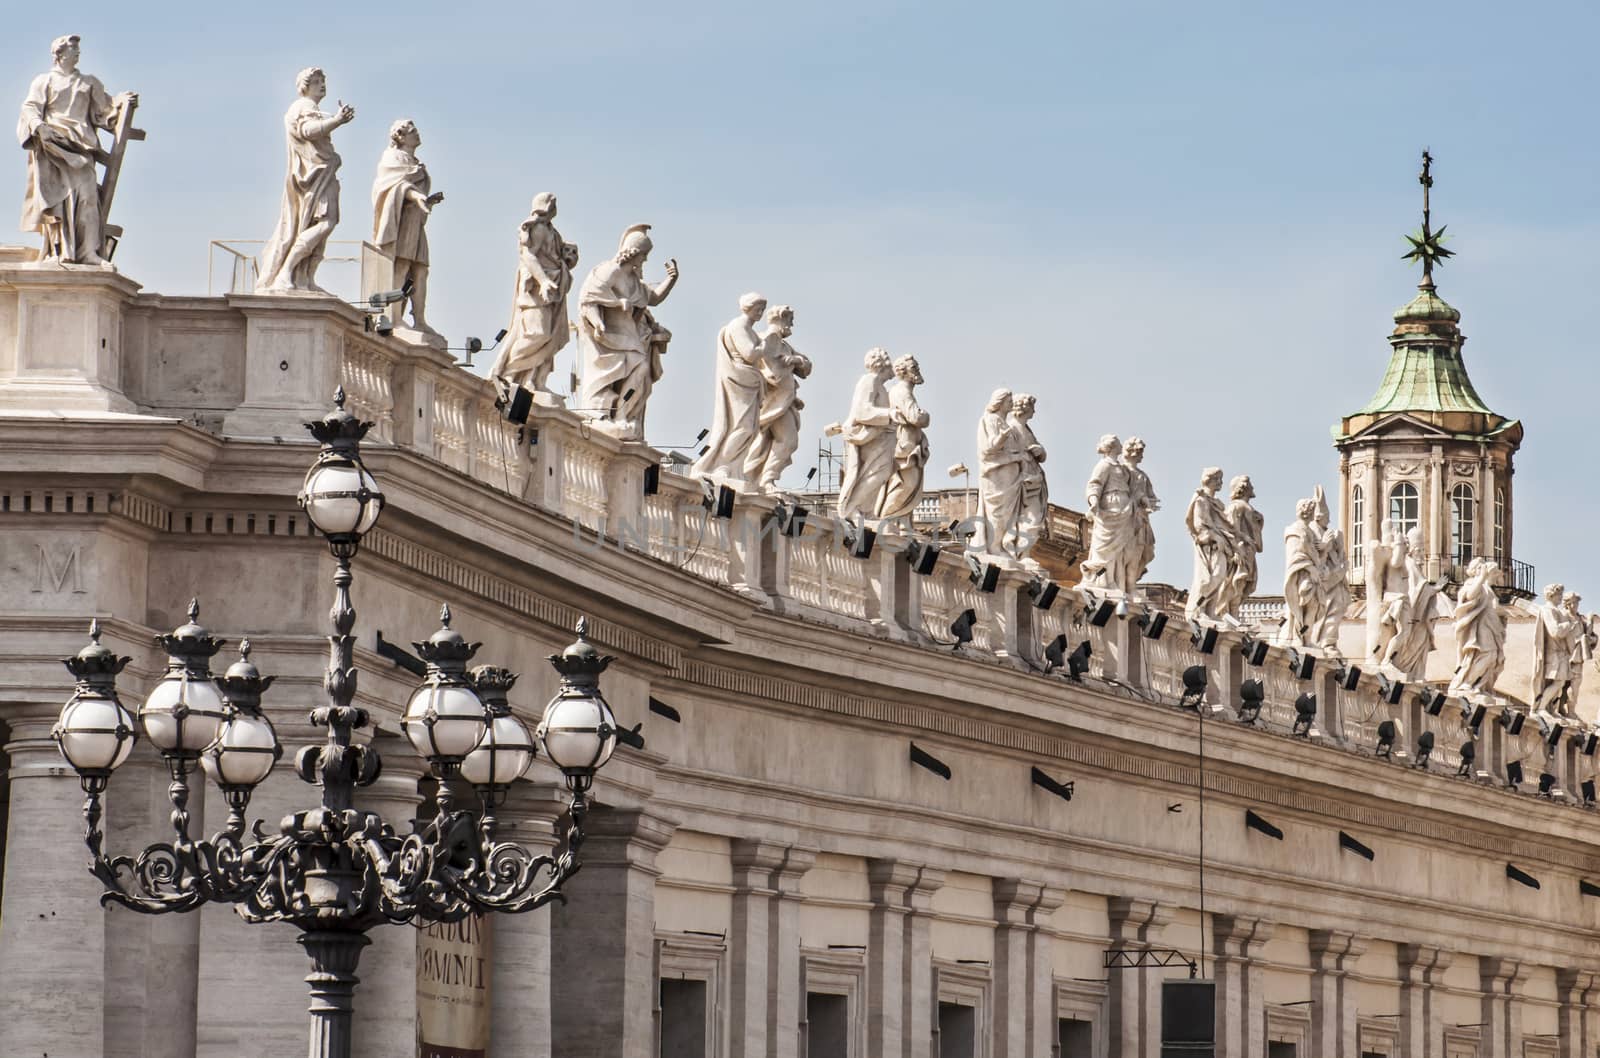 view of the St. Peter's church in Vatican city